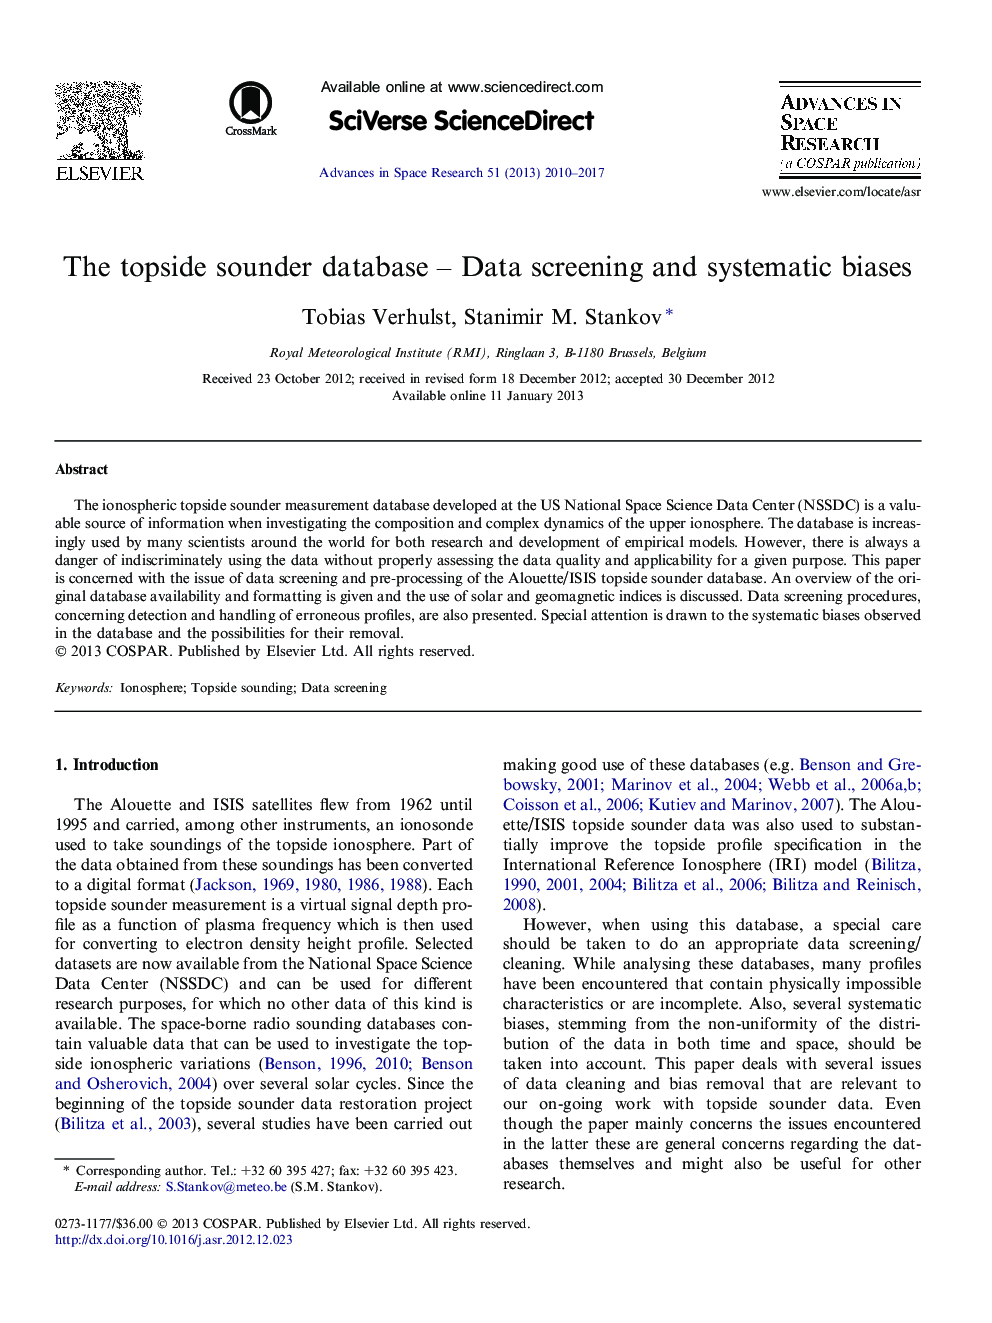 The topside sounder database - Data screening and systematic biases